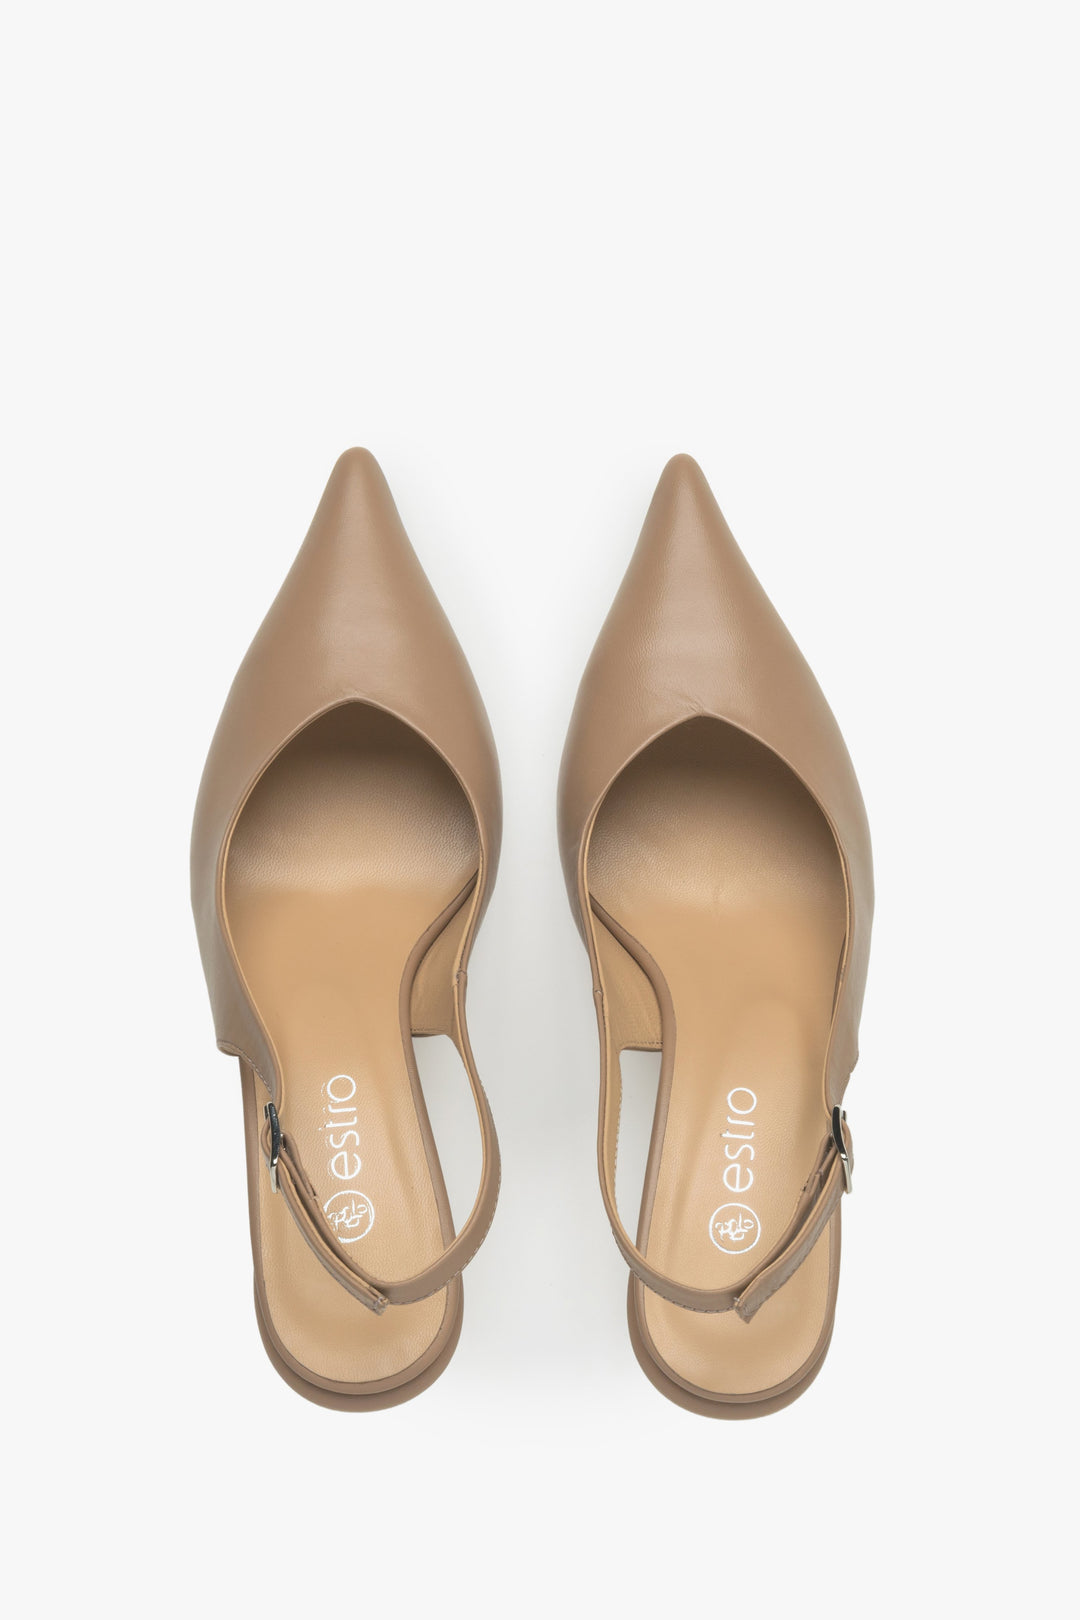 Women's beige leather slingback pumps - top view presentation of the model.